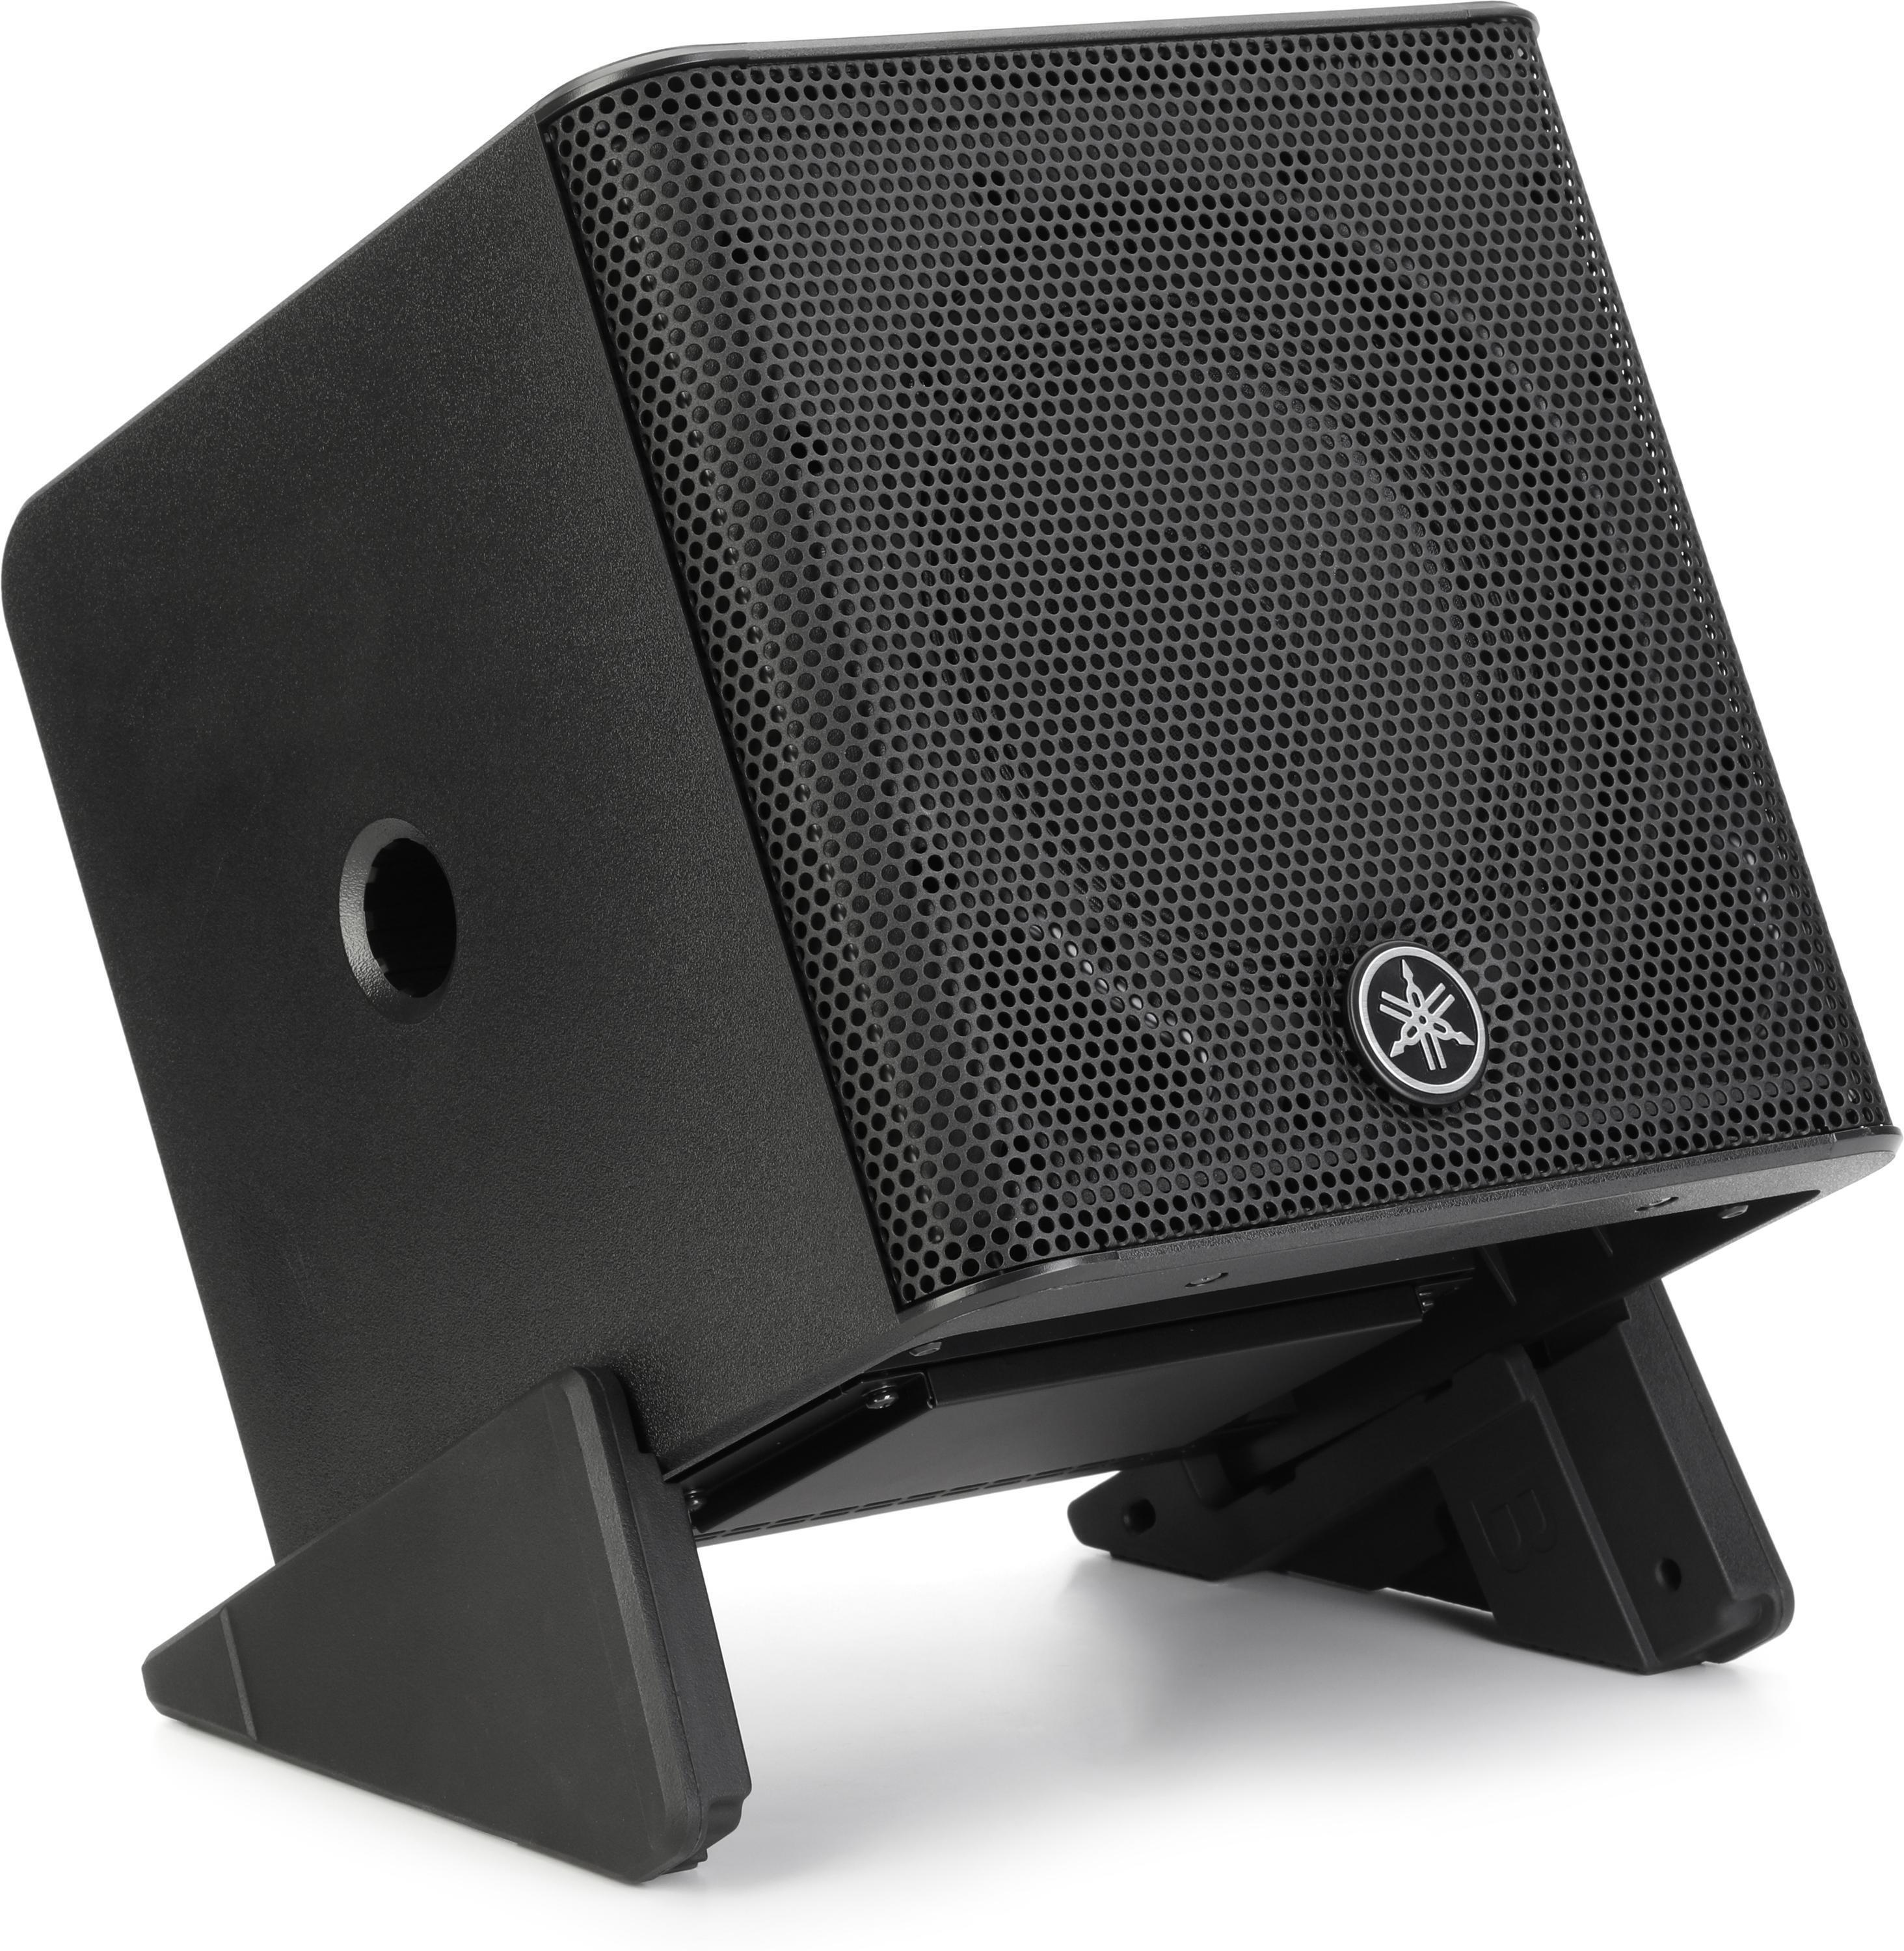 Bundled Item: Yamaha STAGEPAS 200BTR Battery-powered Portable PA System with Bluetooth